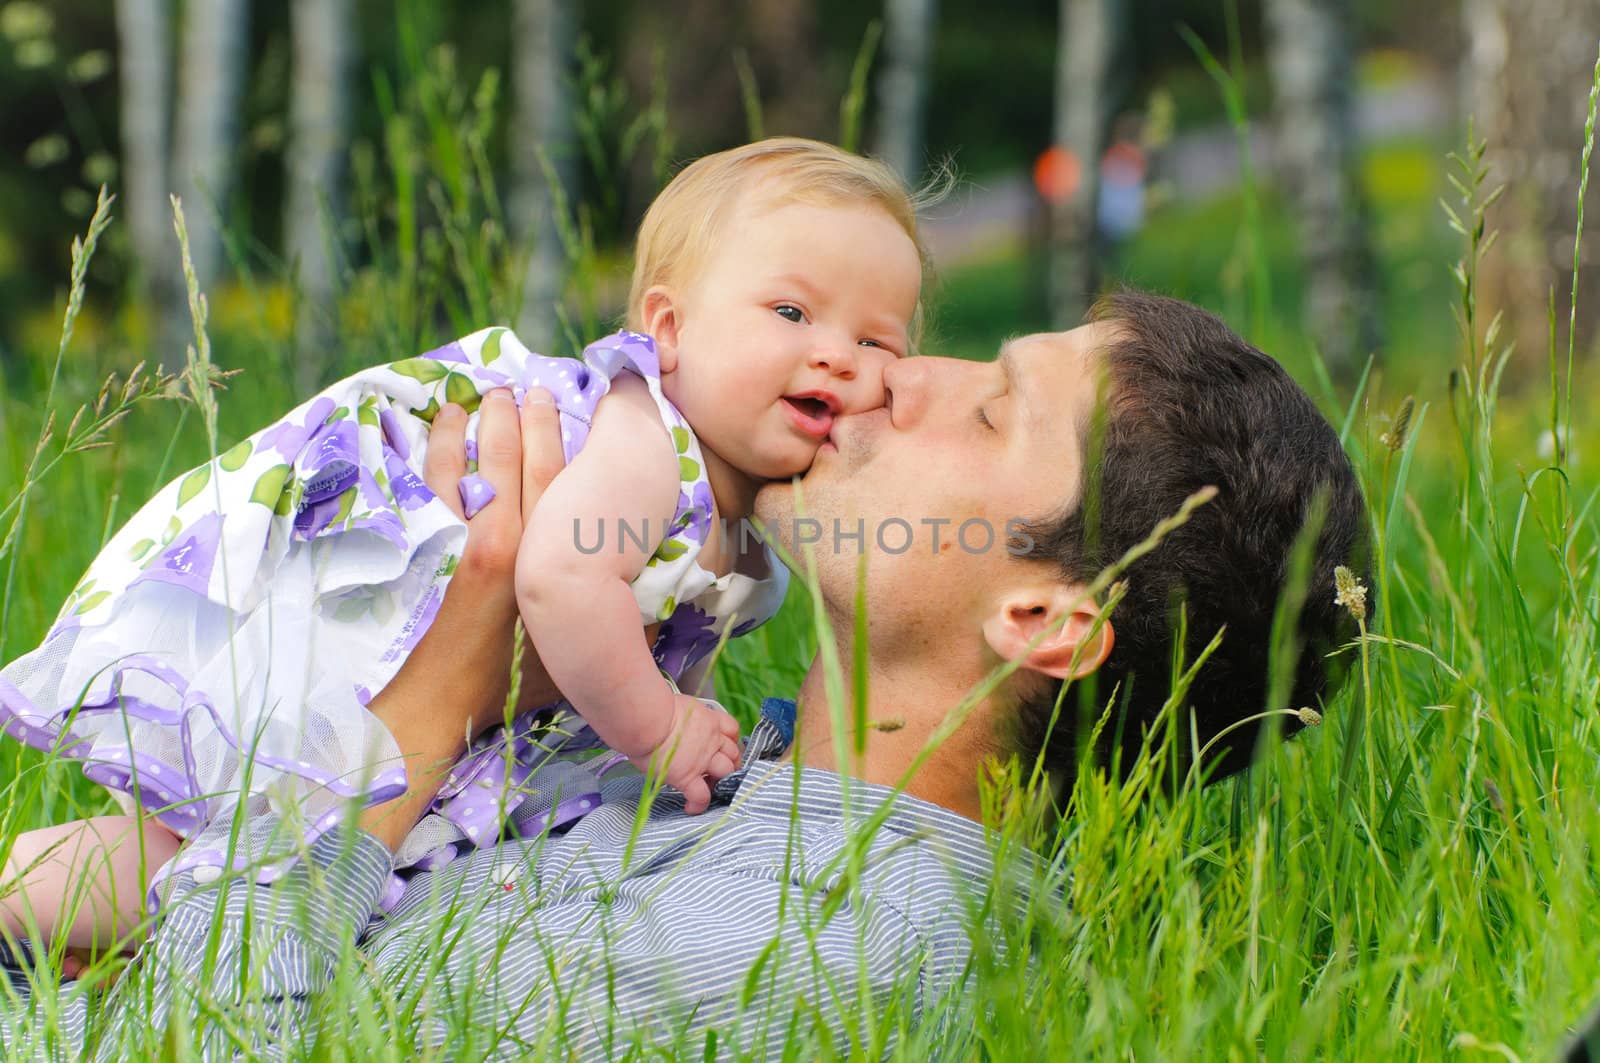 Happy father with his daughter resting in the grass on a meadow